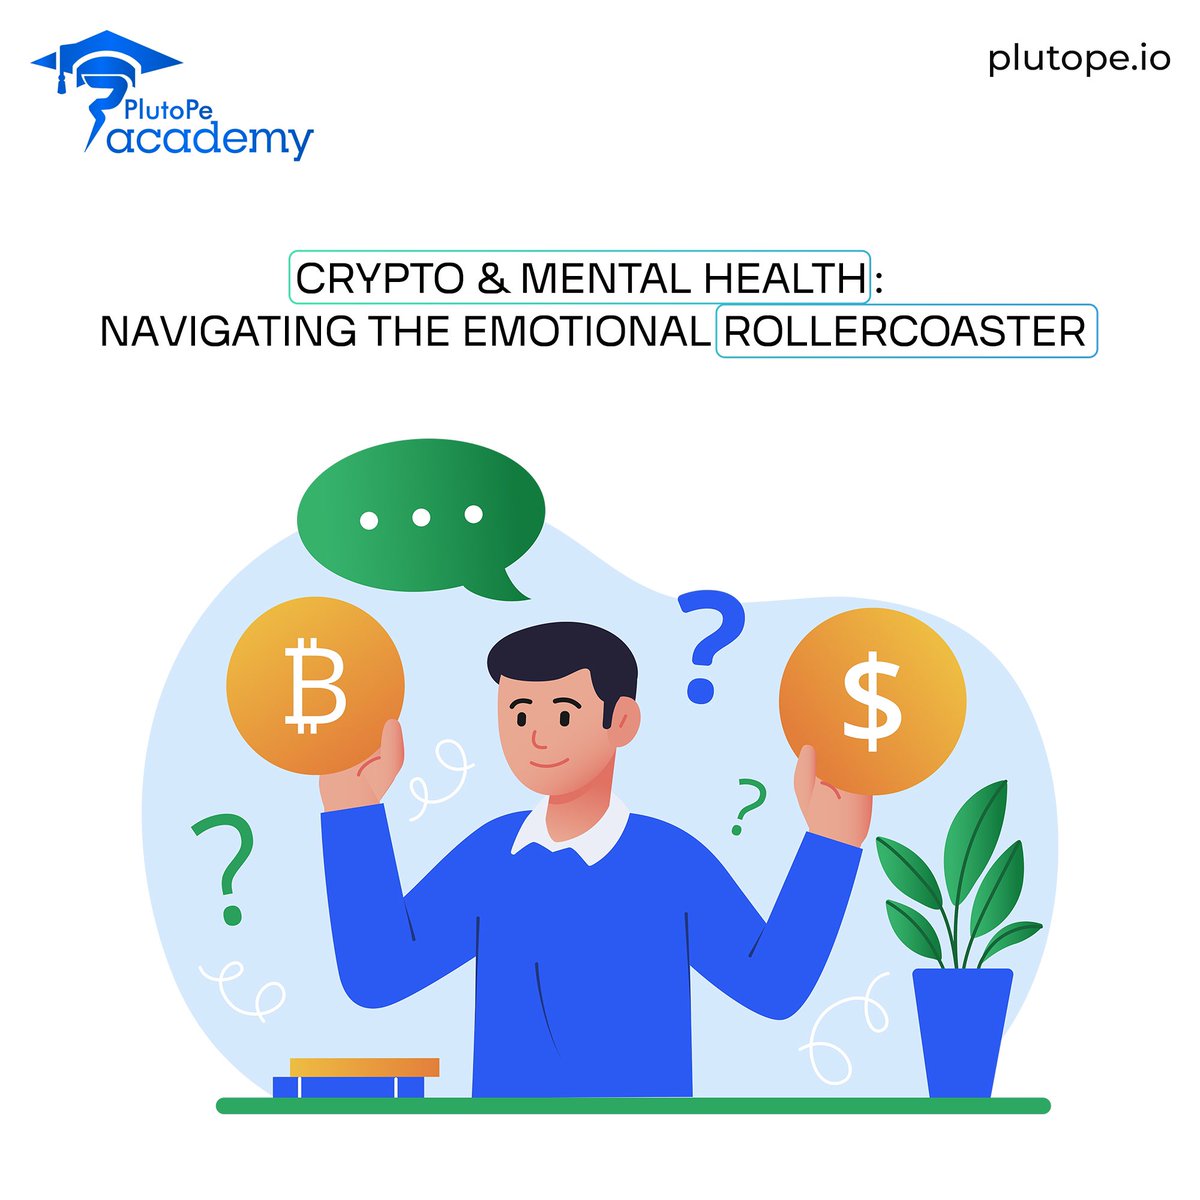 Magic Money Rollercoaster: Feeling the Feels? You're Not Alone! 🫰 Remember GPay & Paytm being new and a bit scary? 😶‍🌫️Imagine 'magic internet money' going up and down super fast, like a rollercoaster!🎢 That can make us feel nervous, excited, or even scared, just like on a real